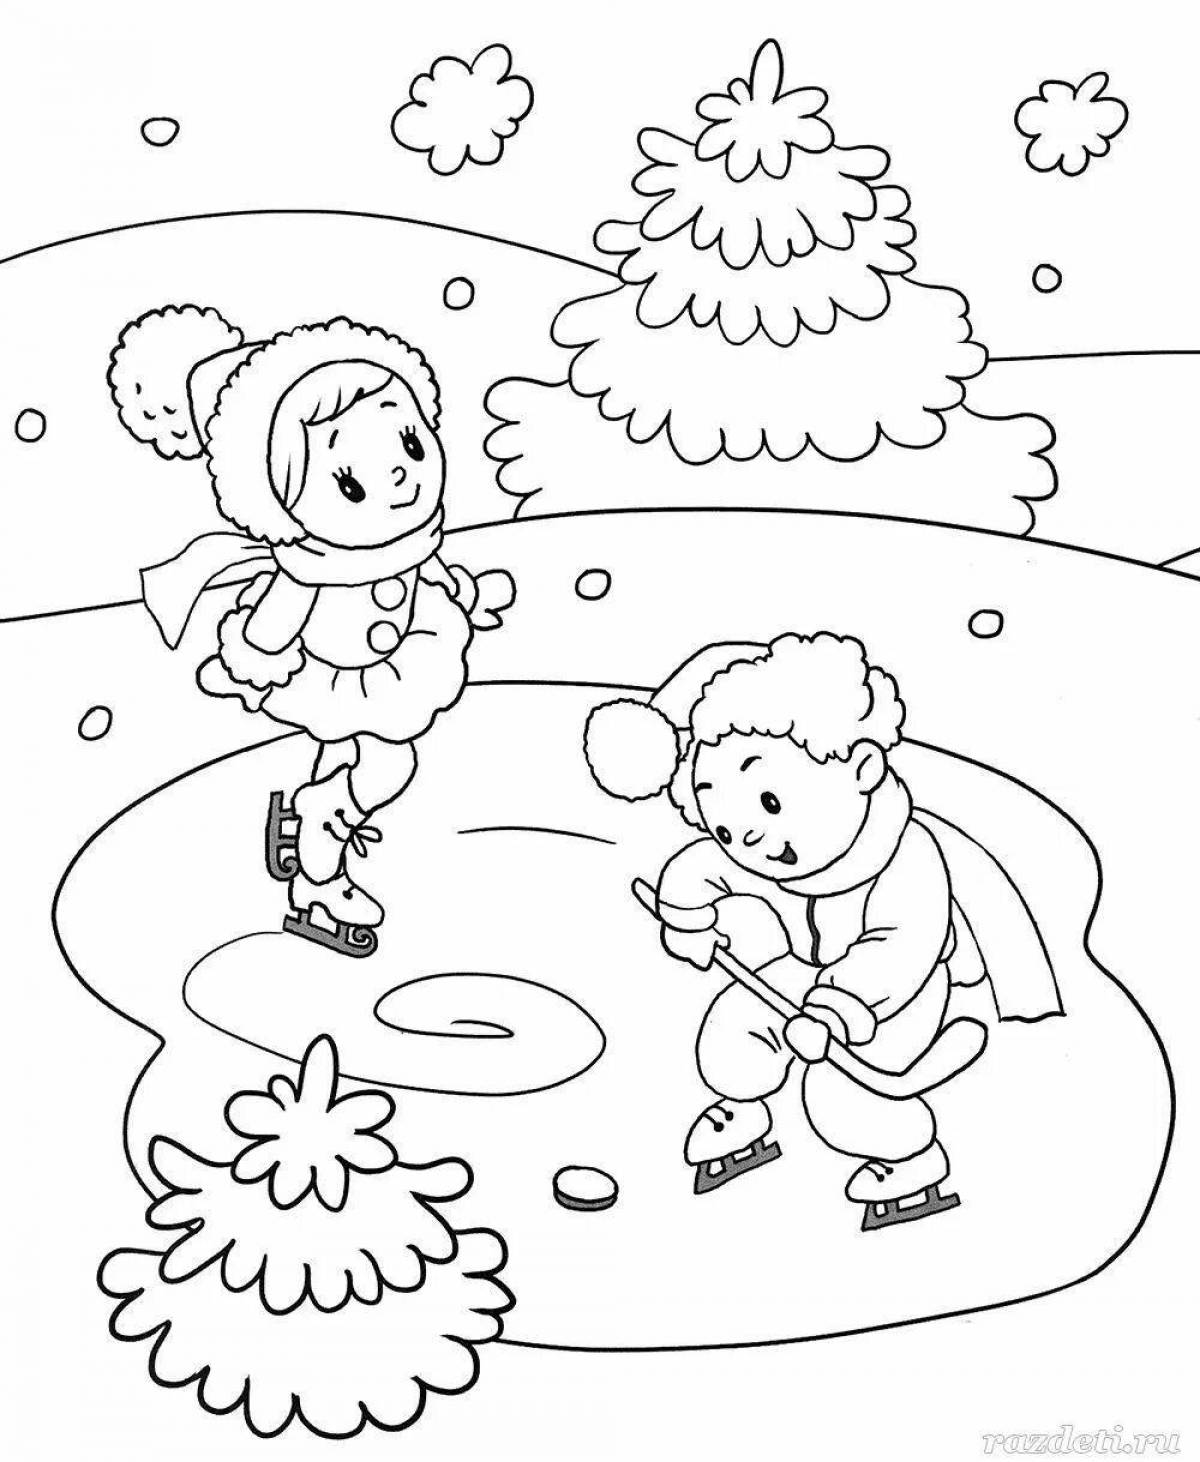 Fantastic winter coloring book for 4-5 year olds